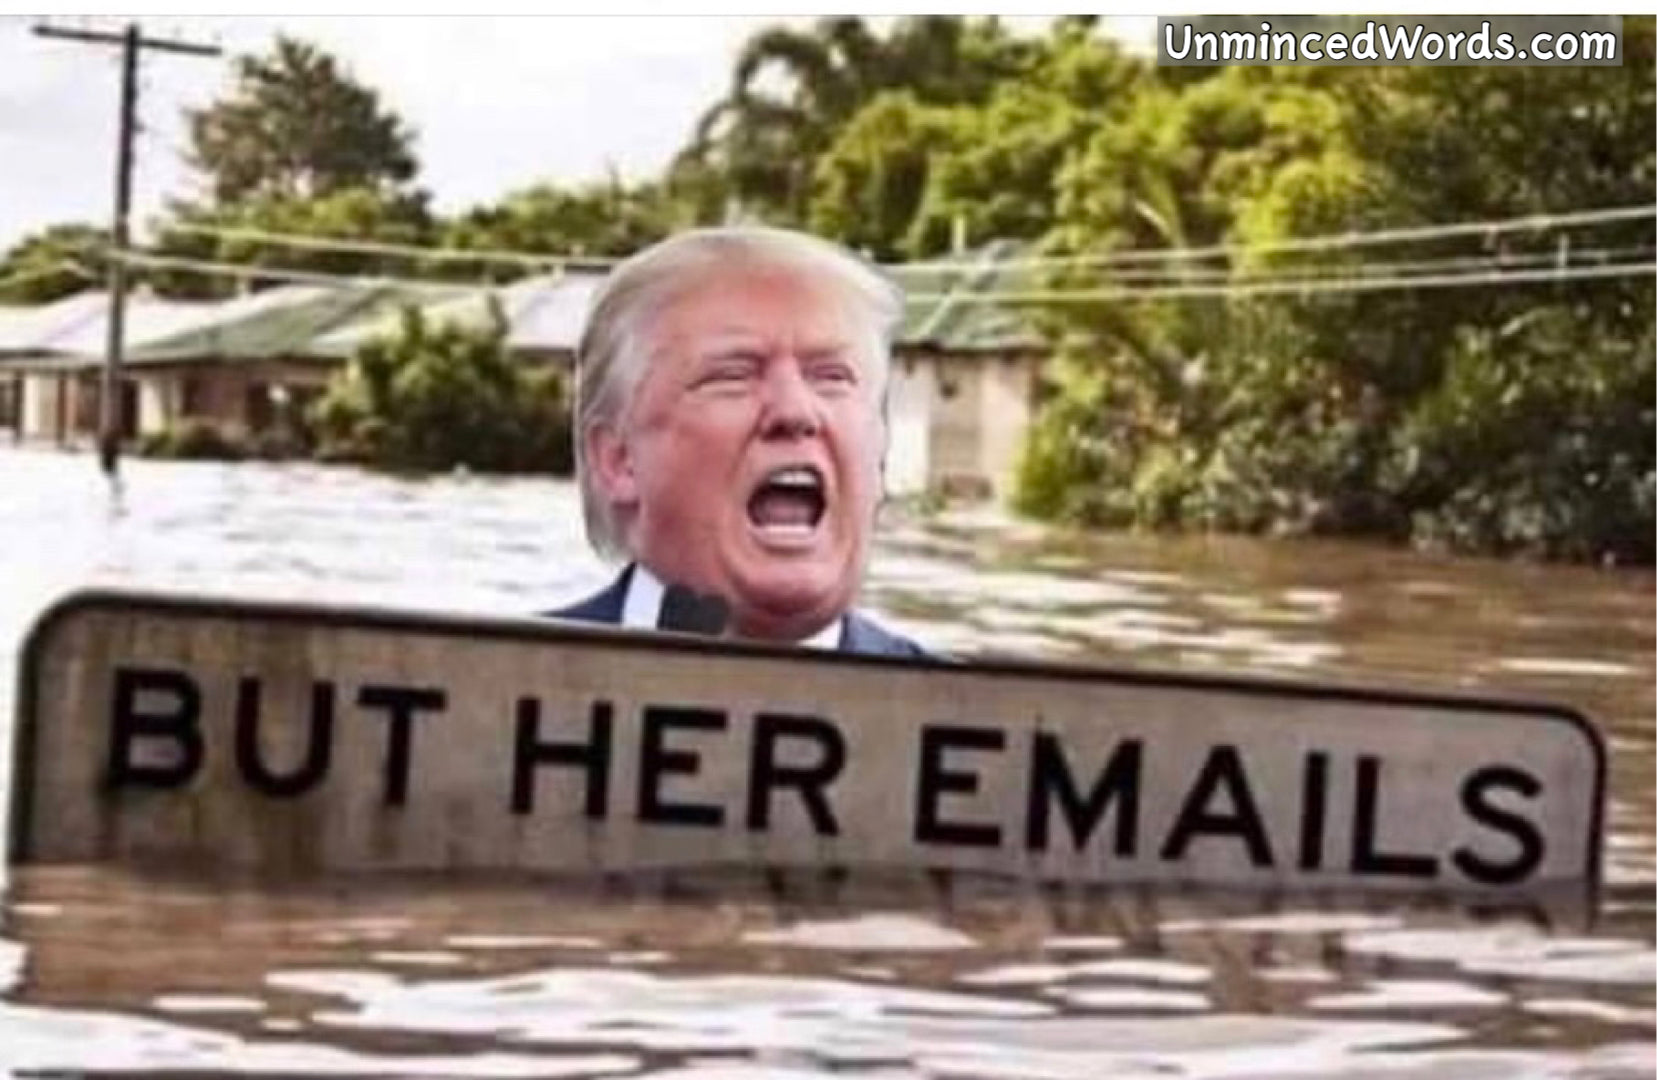 But her emails! Trump memes age well